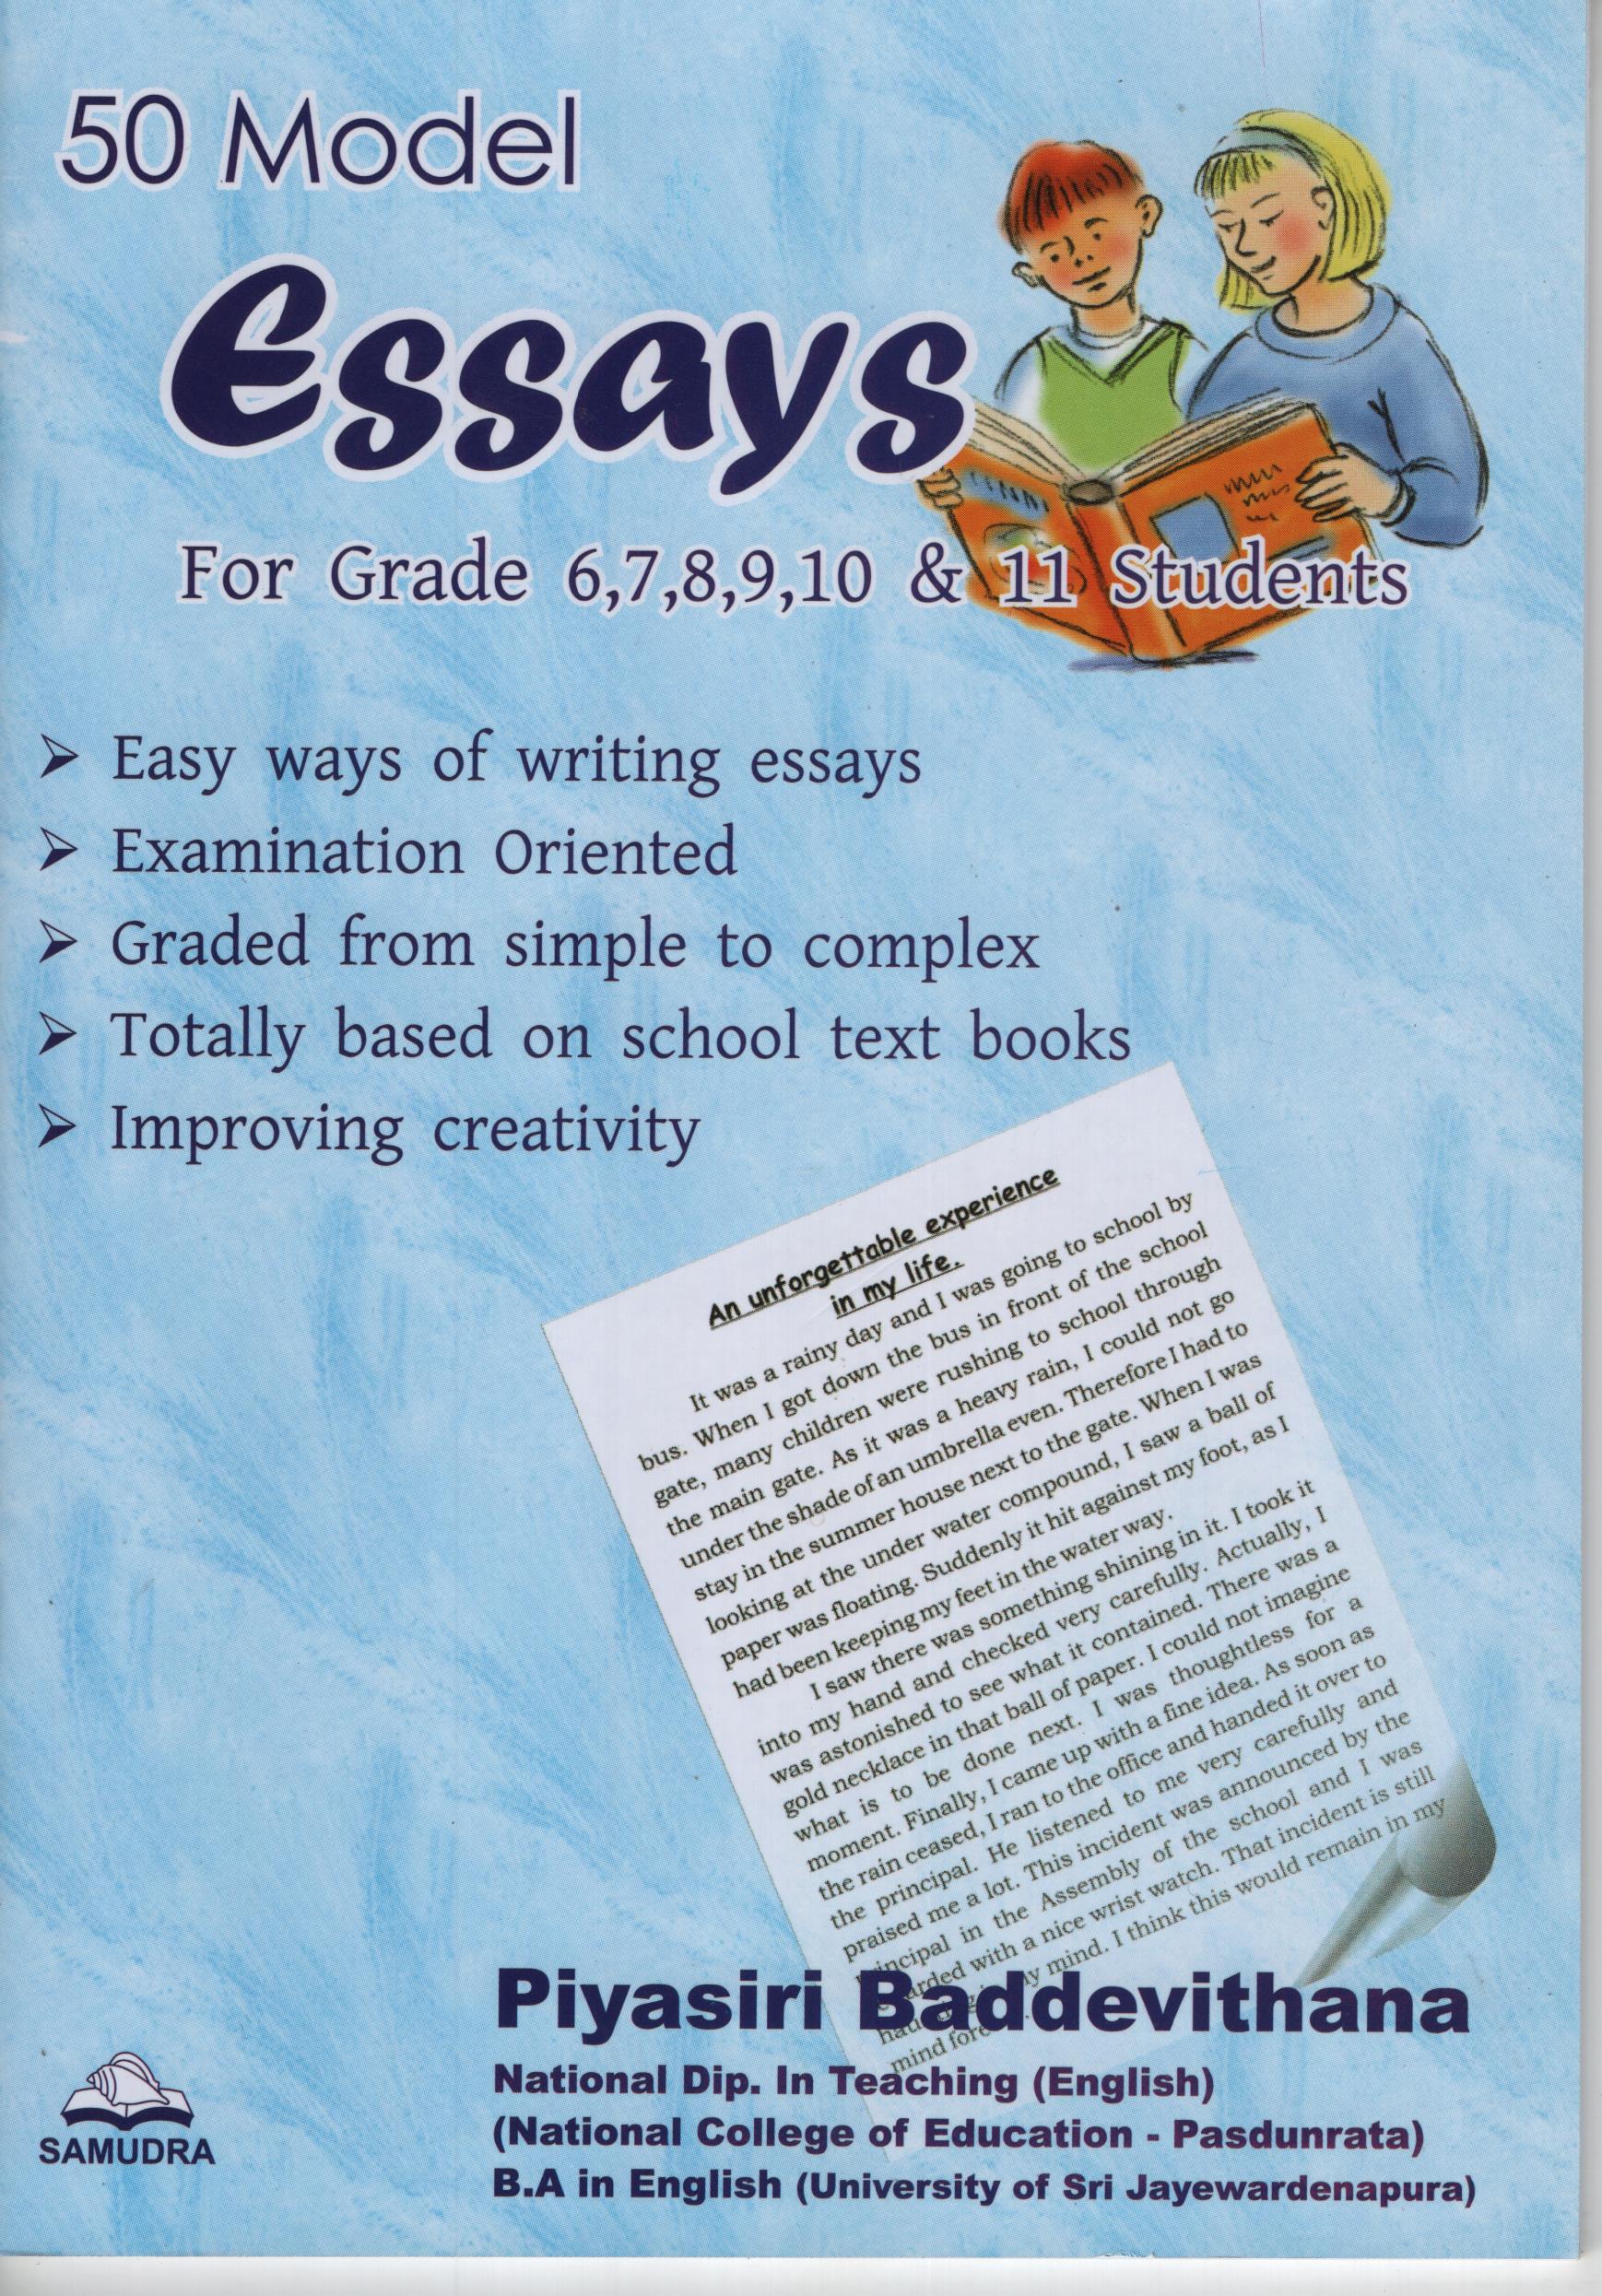 50 Model Essays For Grade 6 7 8 9 10 and 11 Students